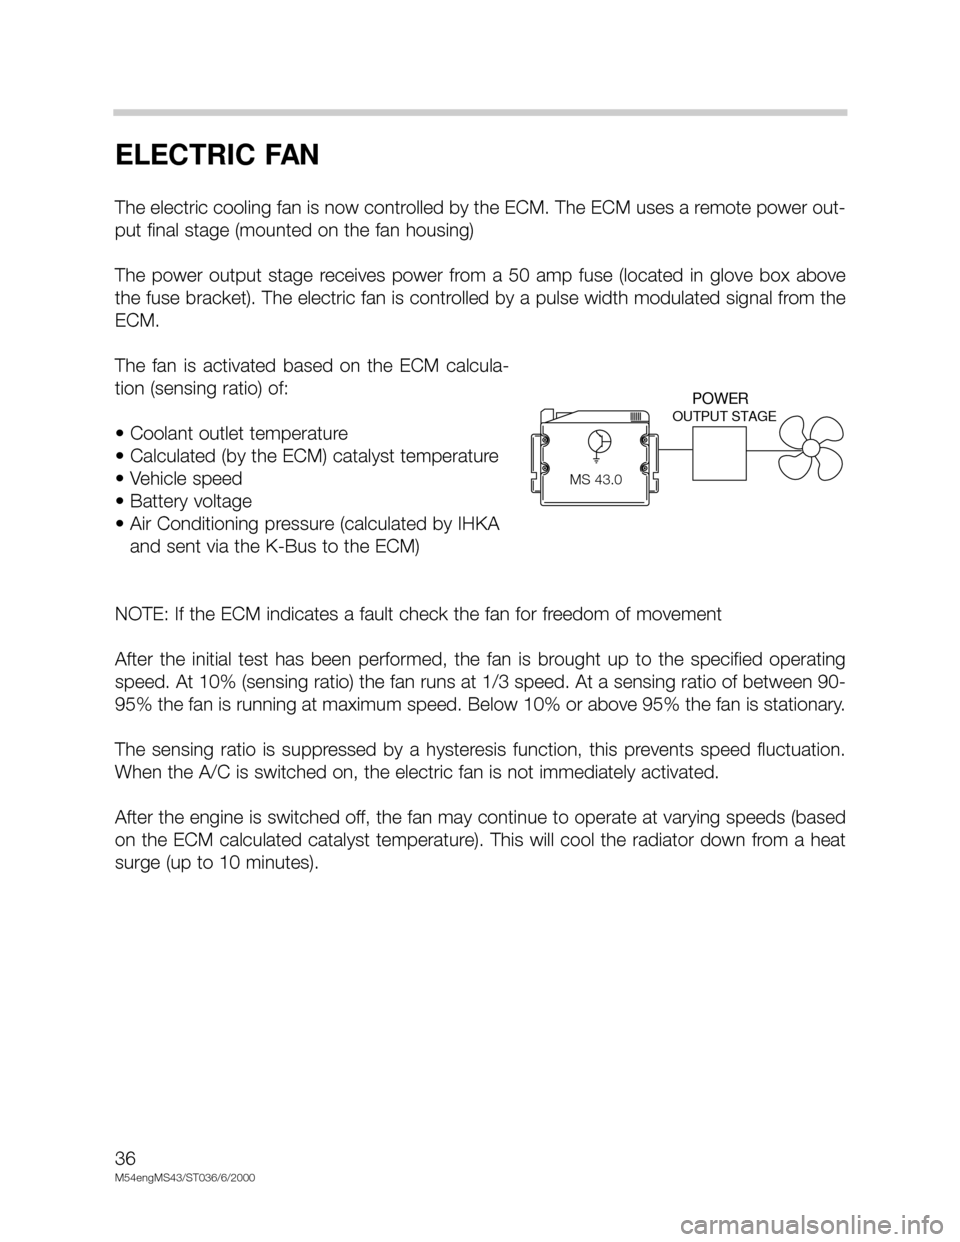 BMW X5 2000 E53 M54 Engine Owners Manual 36
M54engMS43/ST036/6/2000
ELECTRIC FAN
The electric cooling fan is now controlled by the ECM. The ECM uses a remote power out-
put final stage (mounted on the fan housing)
The  power  output  stage  